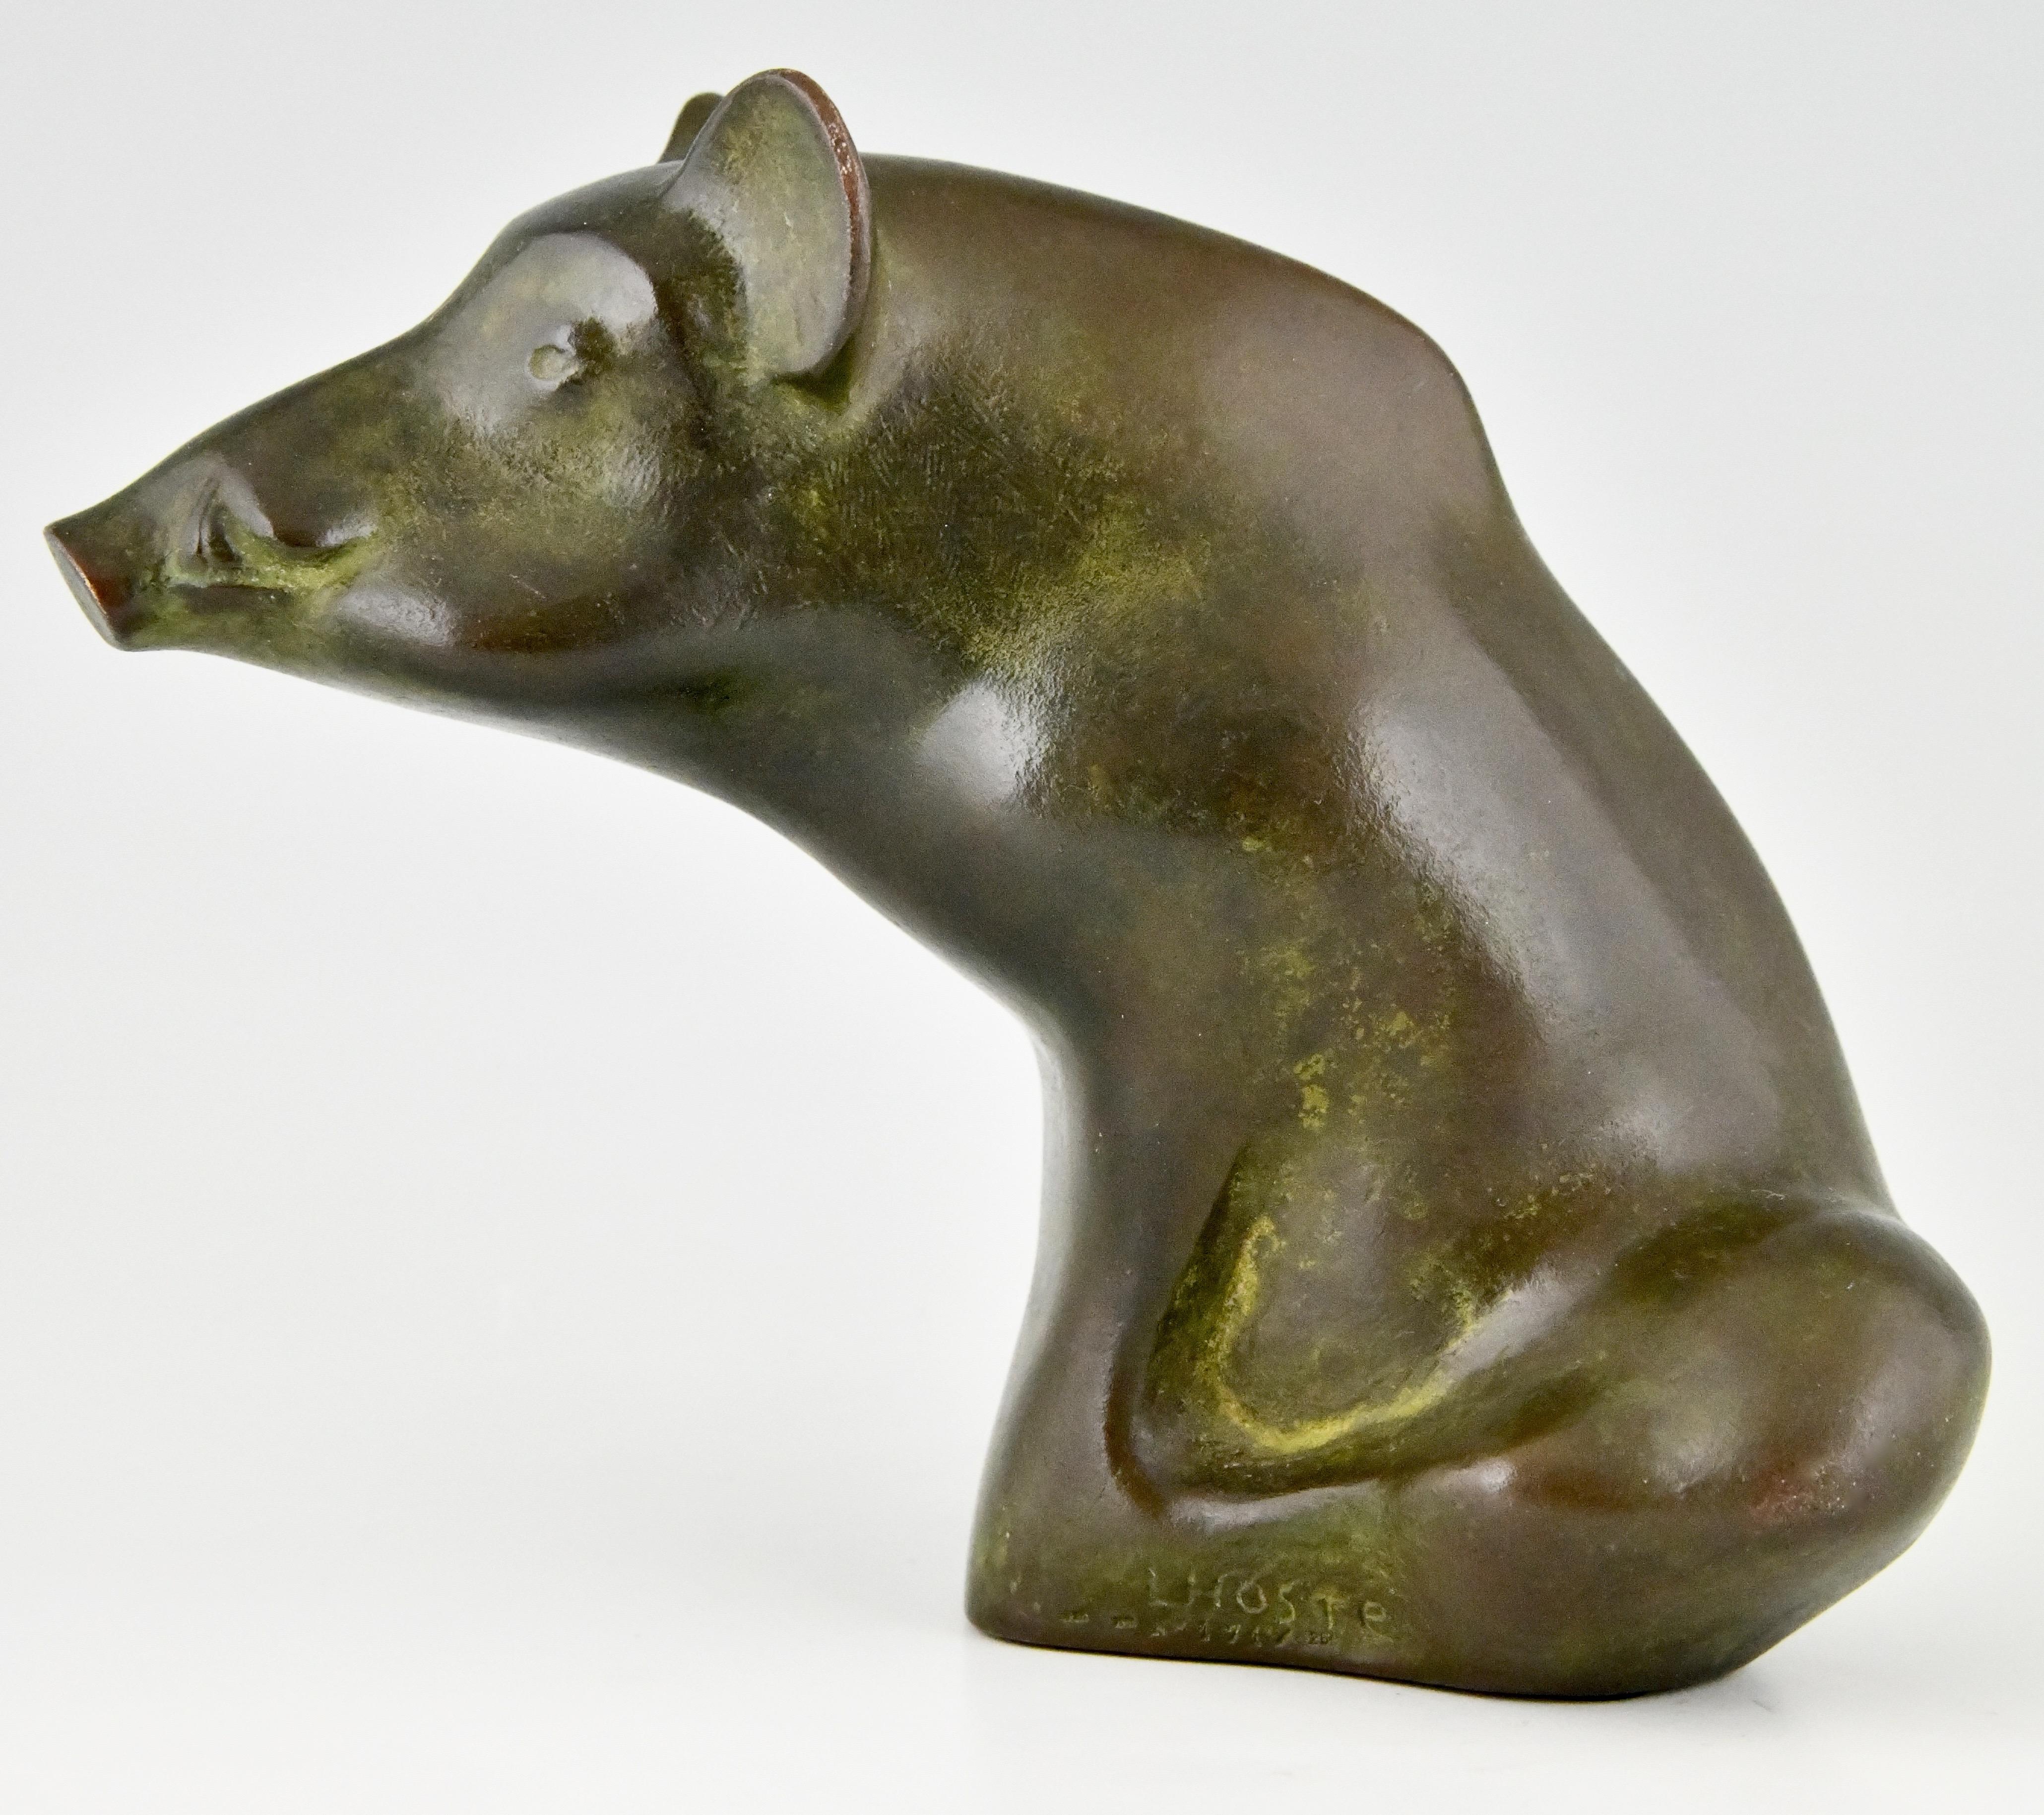 Stylish bronze sculpture of a seated wild boar by the French artist Claude Lhoste (1929-2010) Beautiful patina.
Signed, dated 1993, numbered 171/250 and with foundry mark Monnaie de Paris.
Literature:
“Dictionnaire illustré des sculpteurs